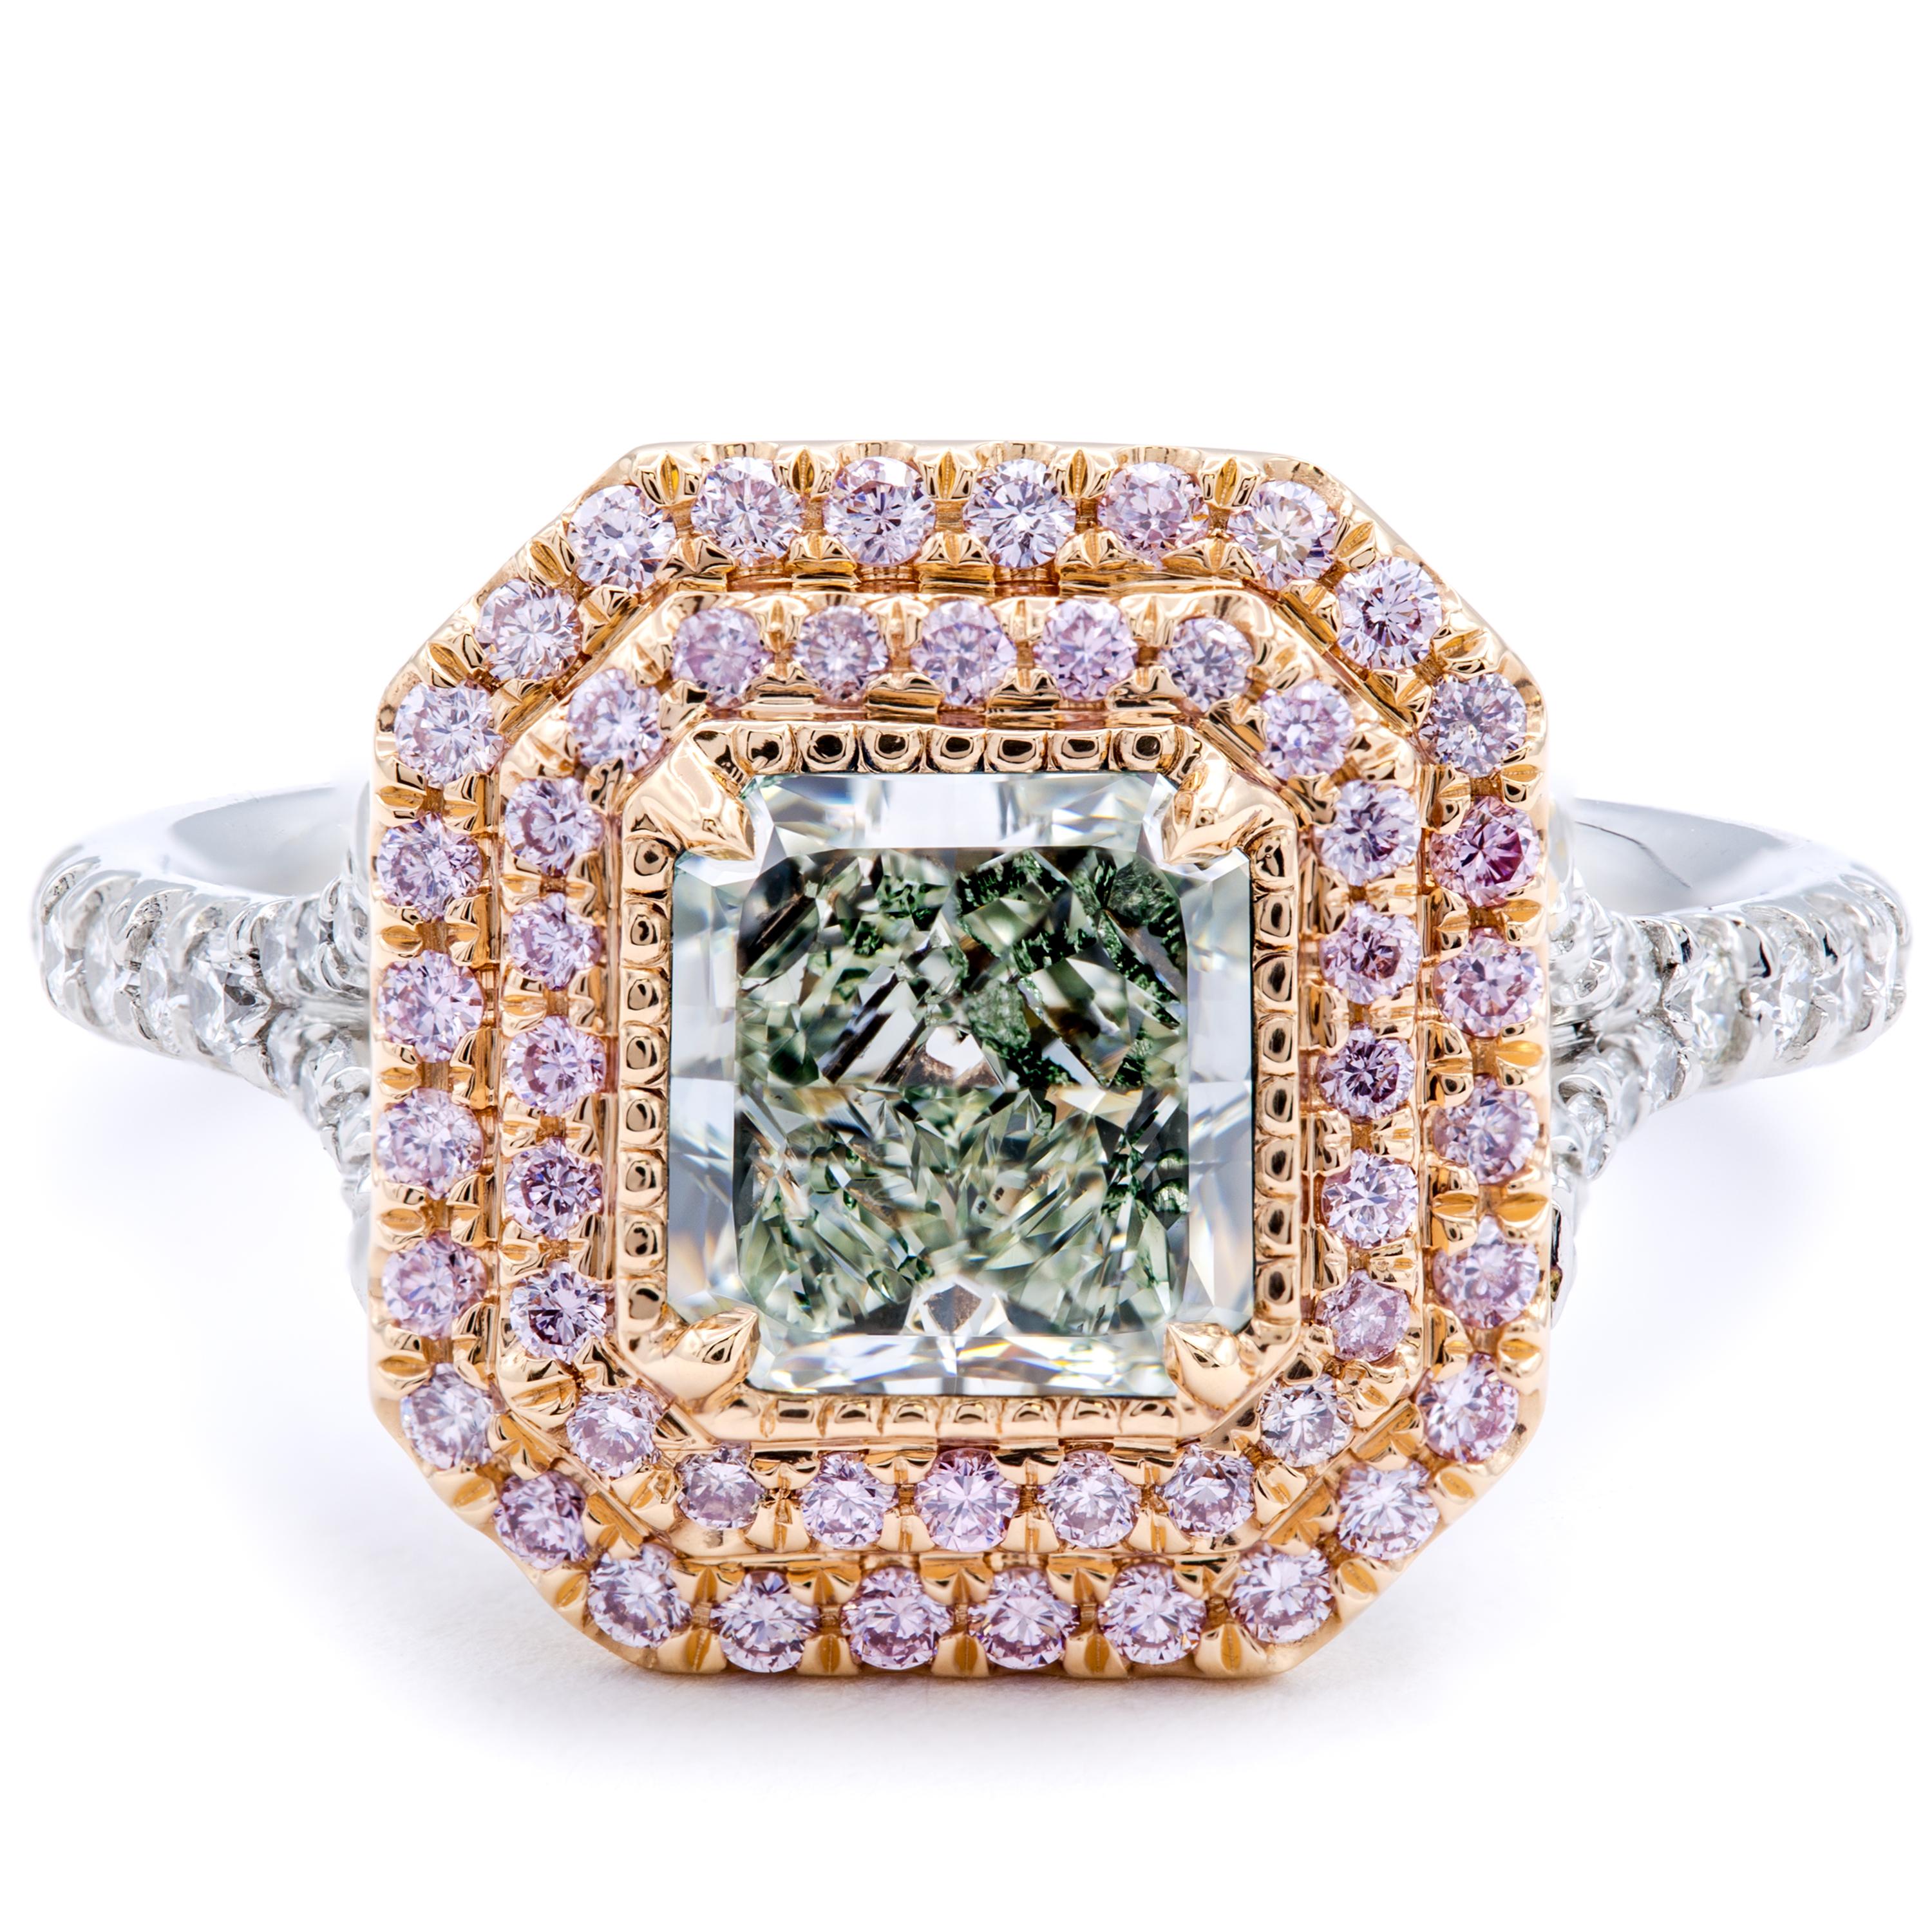 A delectable contrast in colors amounts in a stunning engagement ring designed by David Rosenberg. A band of pure platinum sets white round brilliant pave diamonds around the finger that blend seamlessly into a double halo of natural fancy pink